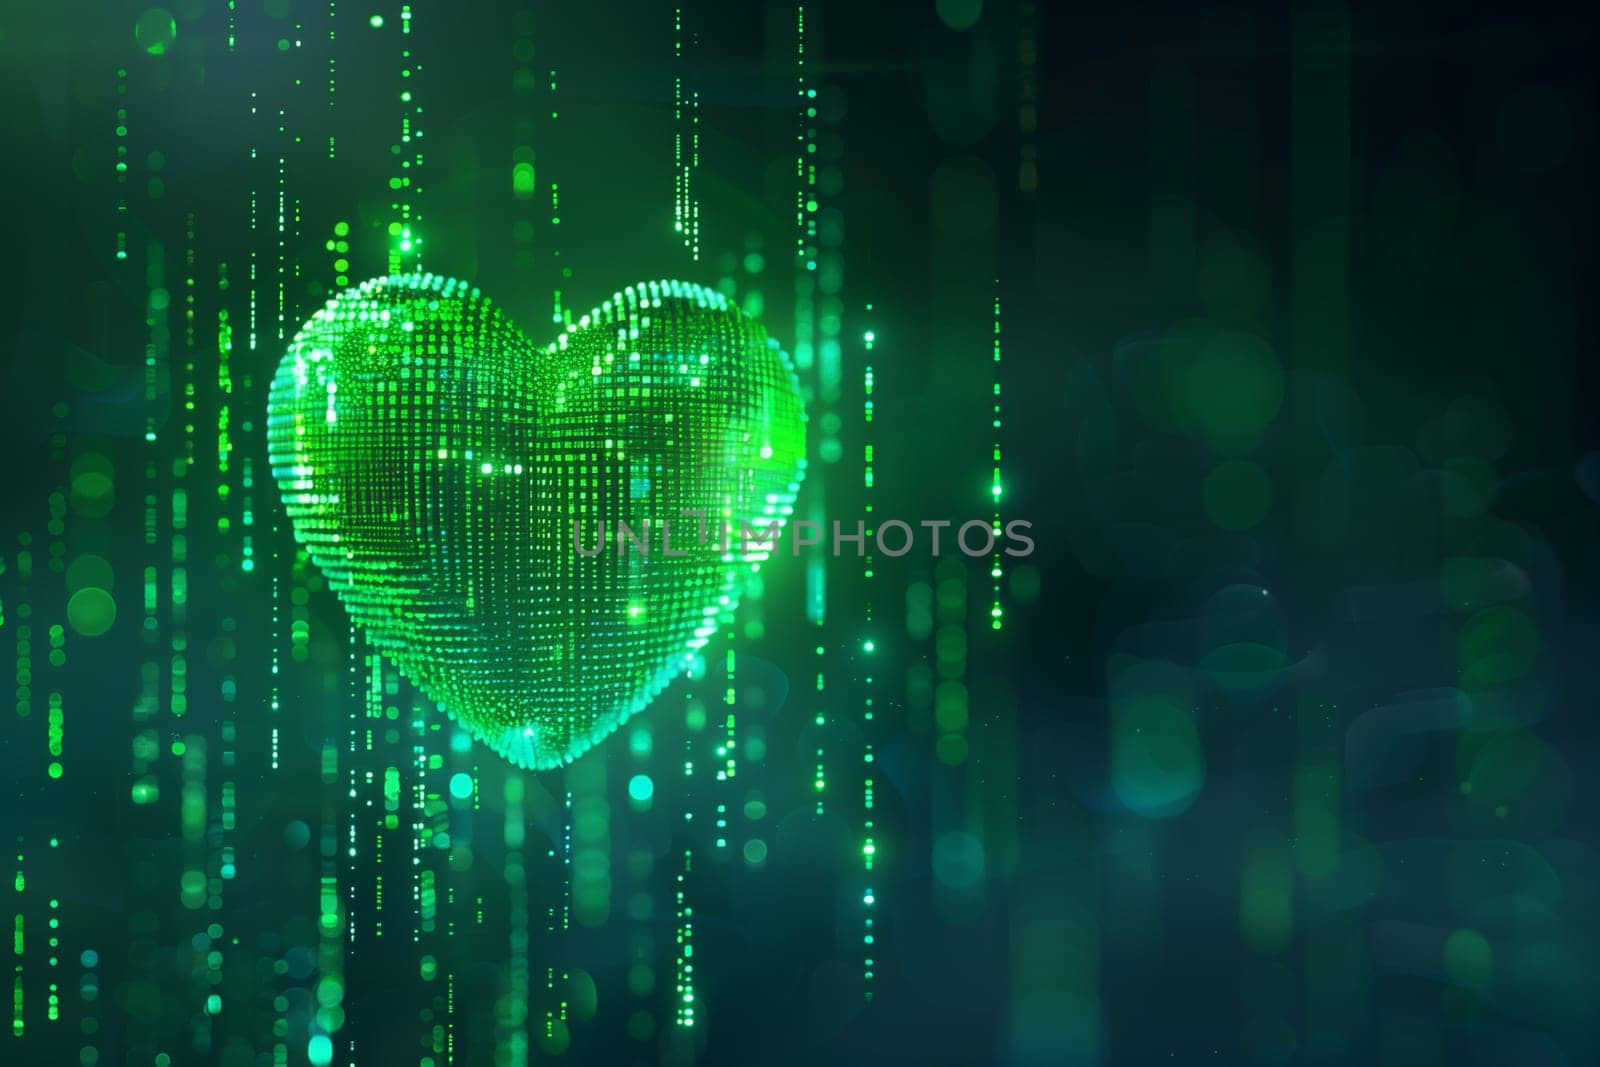 A heart-shaped object is encircled by intricate lines of data, creating a visually striking contrast between emotion and technology.